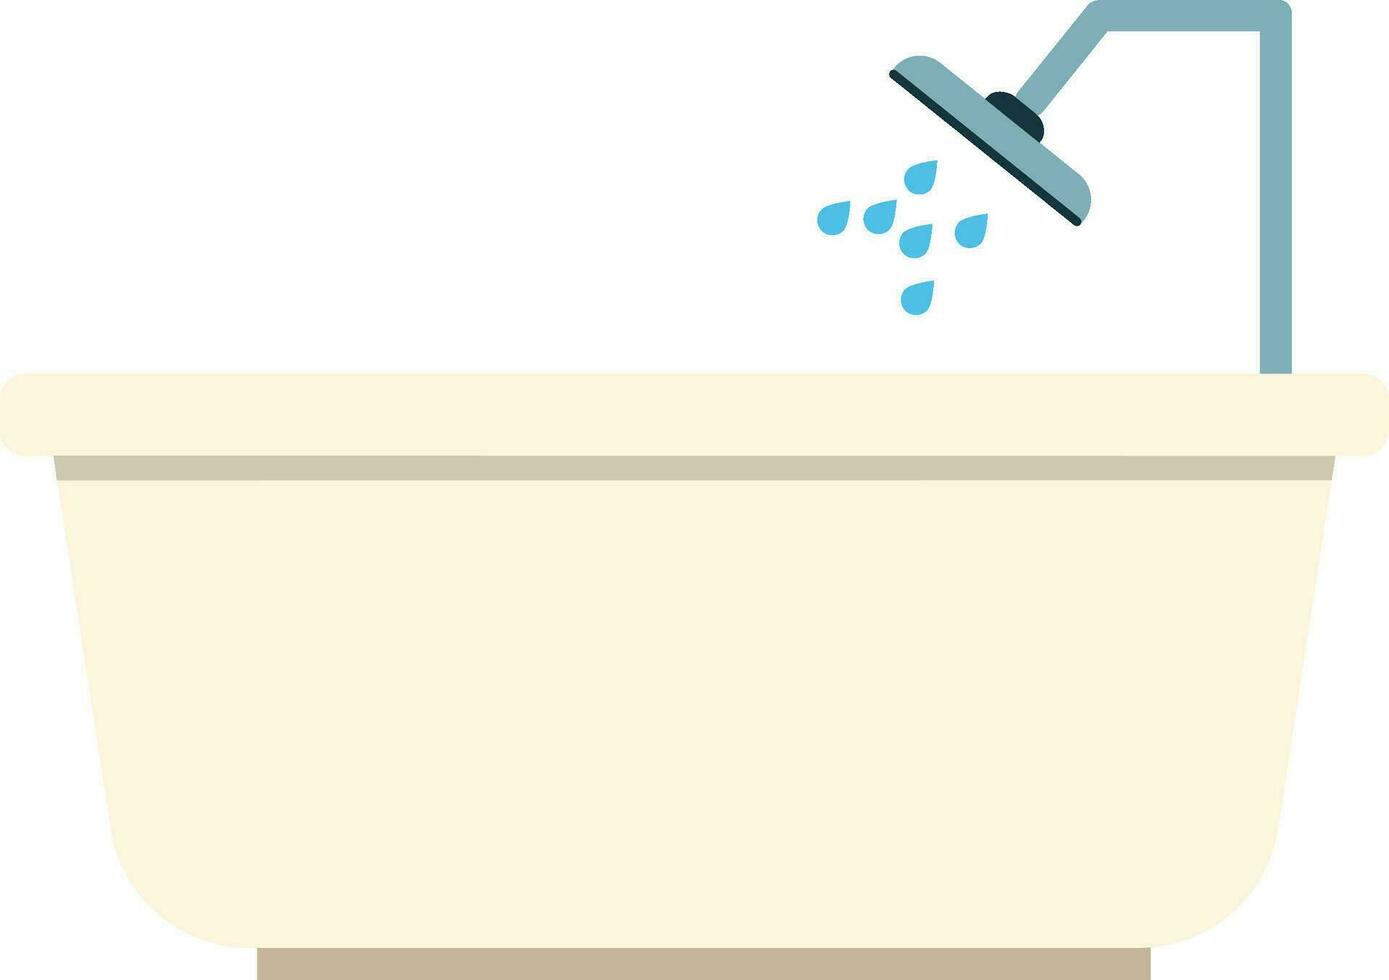 Bathing tub with shower icon. vector